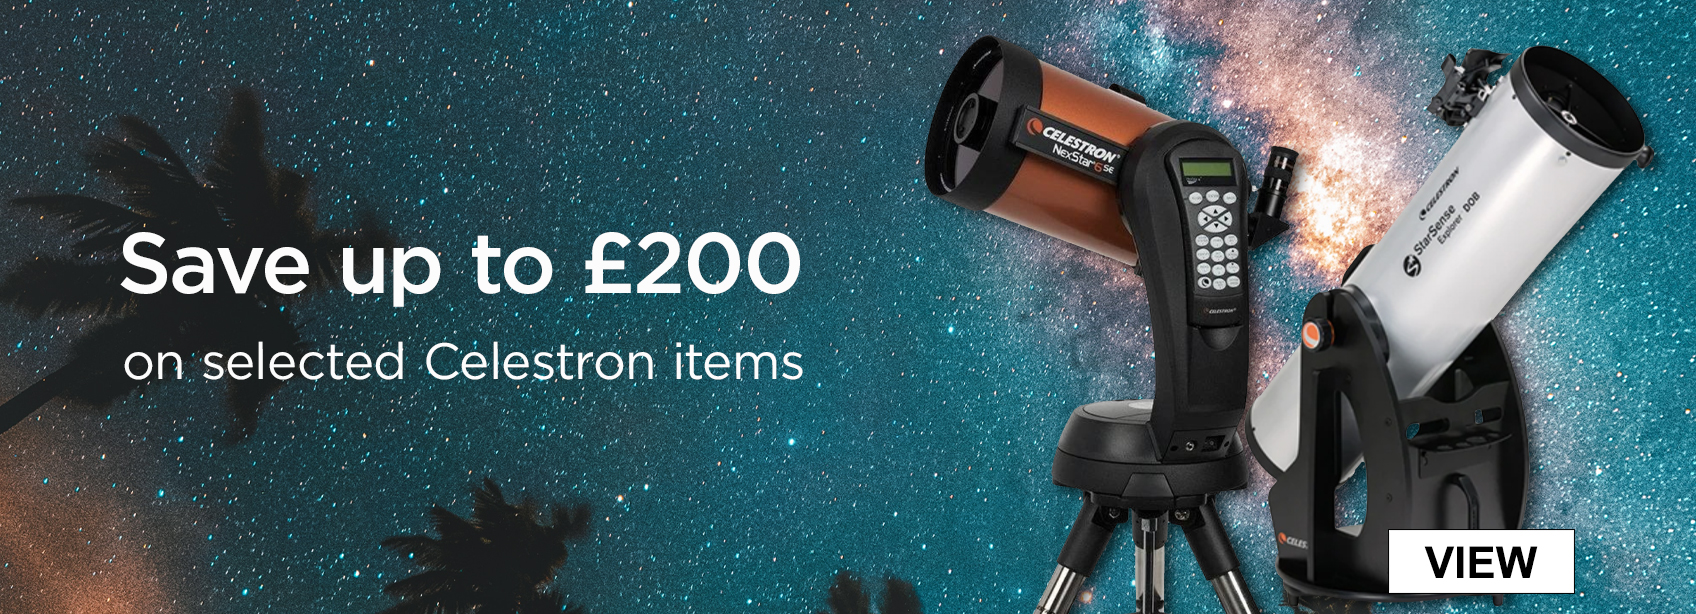 Save up to £200 on selected Celestron items